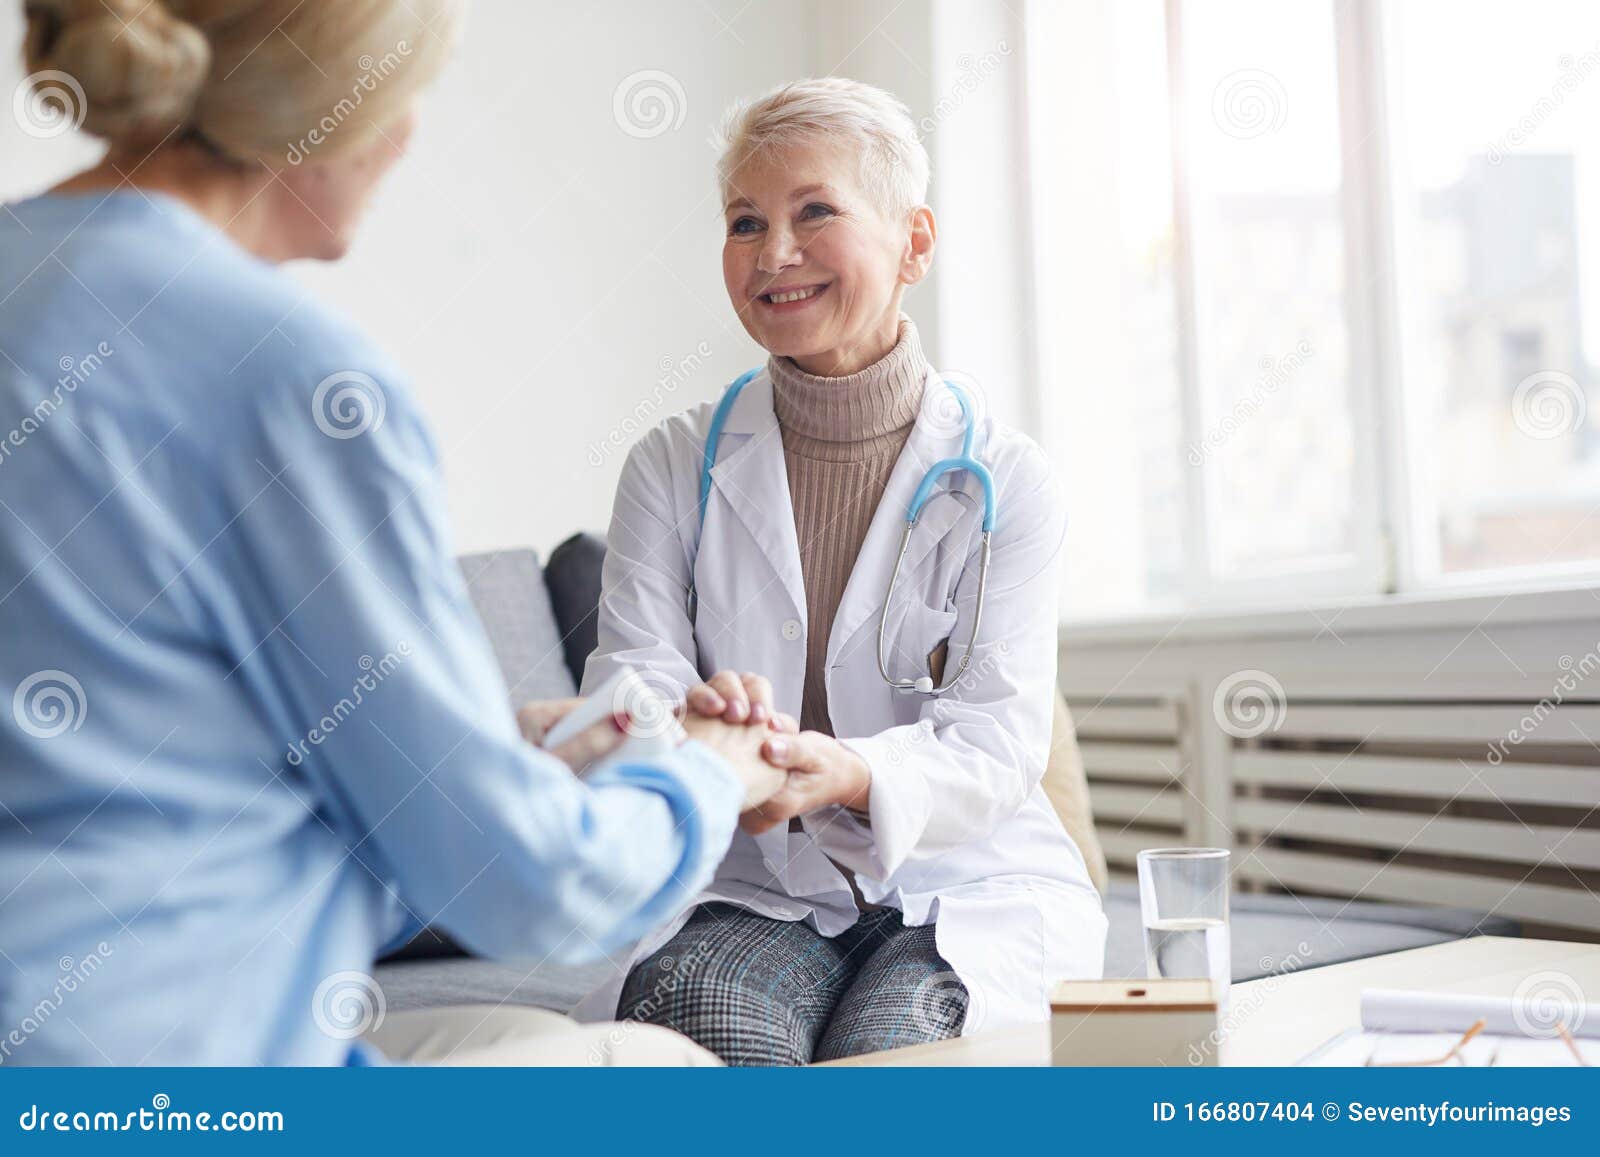 smiling female dostor holding hands with patient